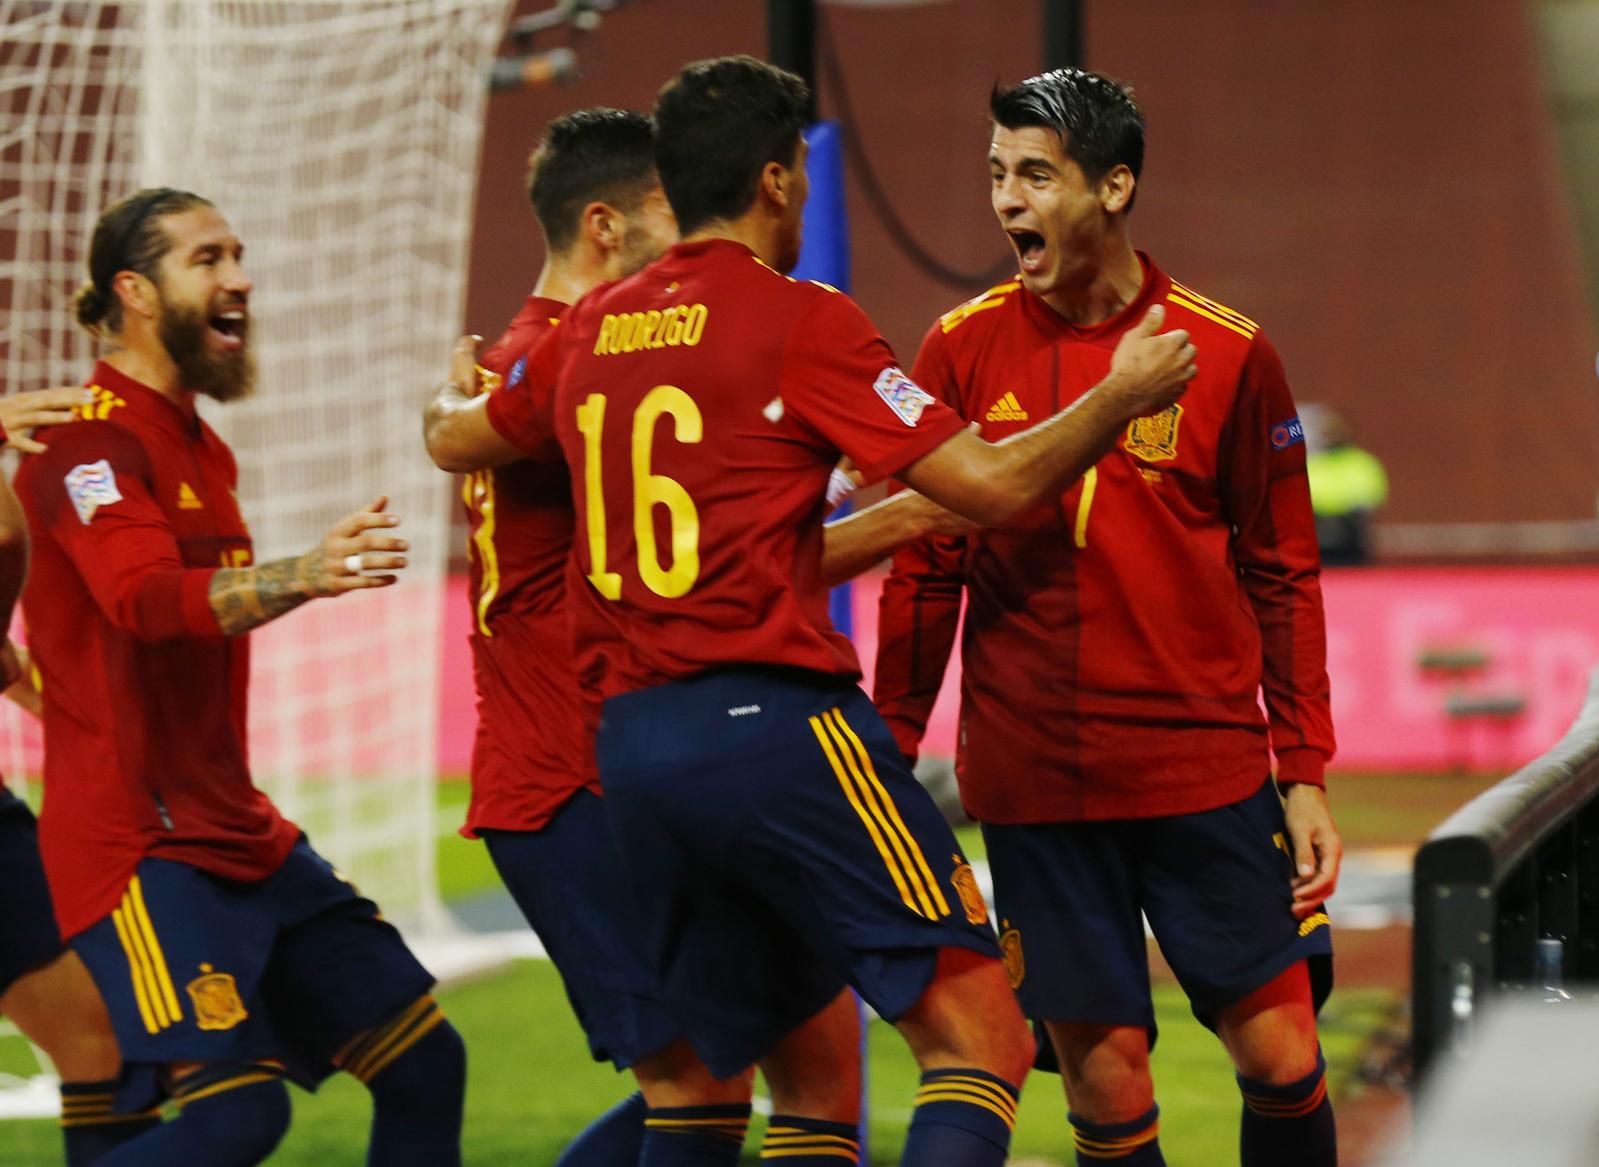 Spain hammer Germany 6-0 to reach Nations League final four